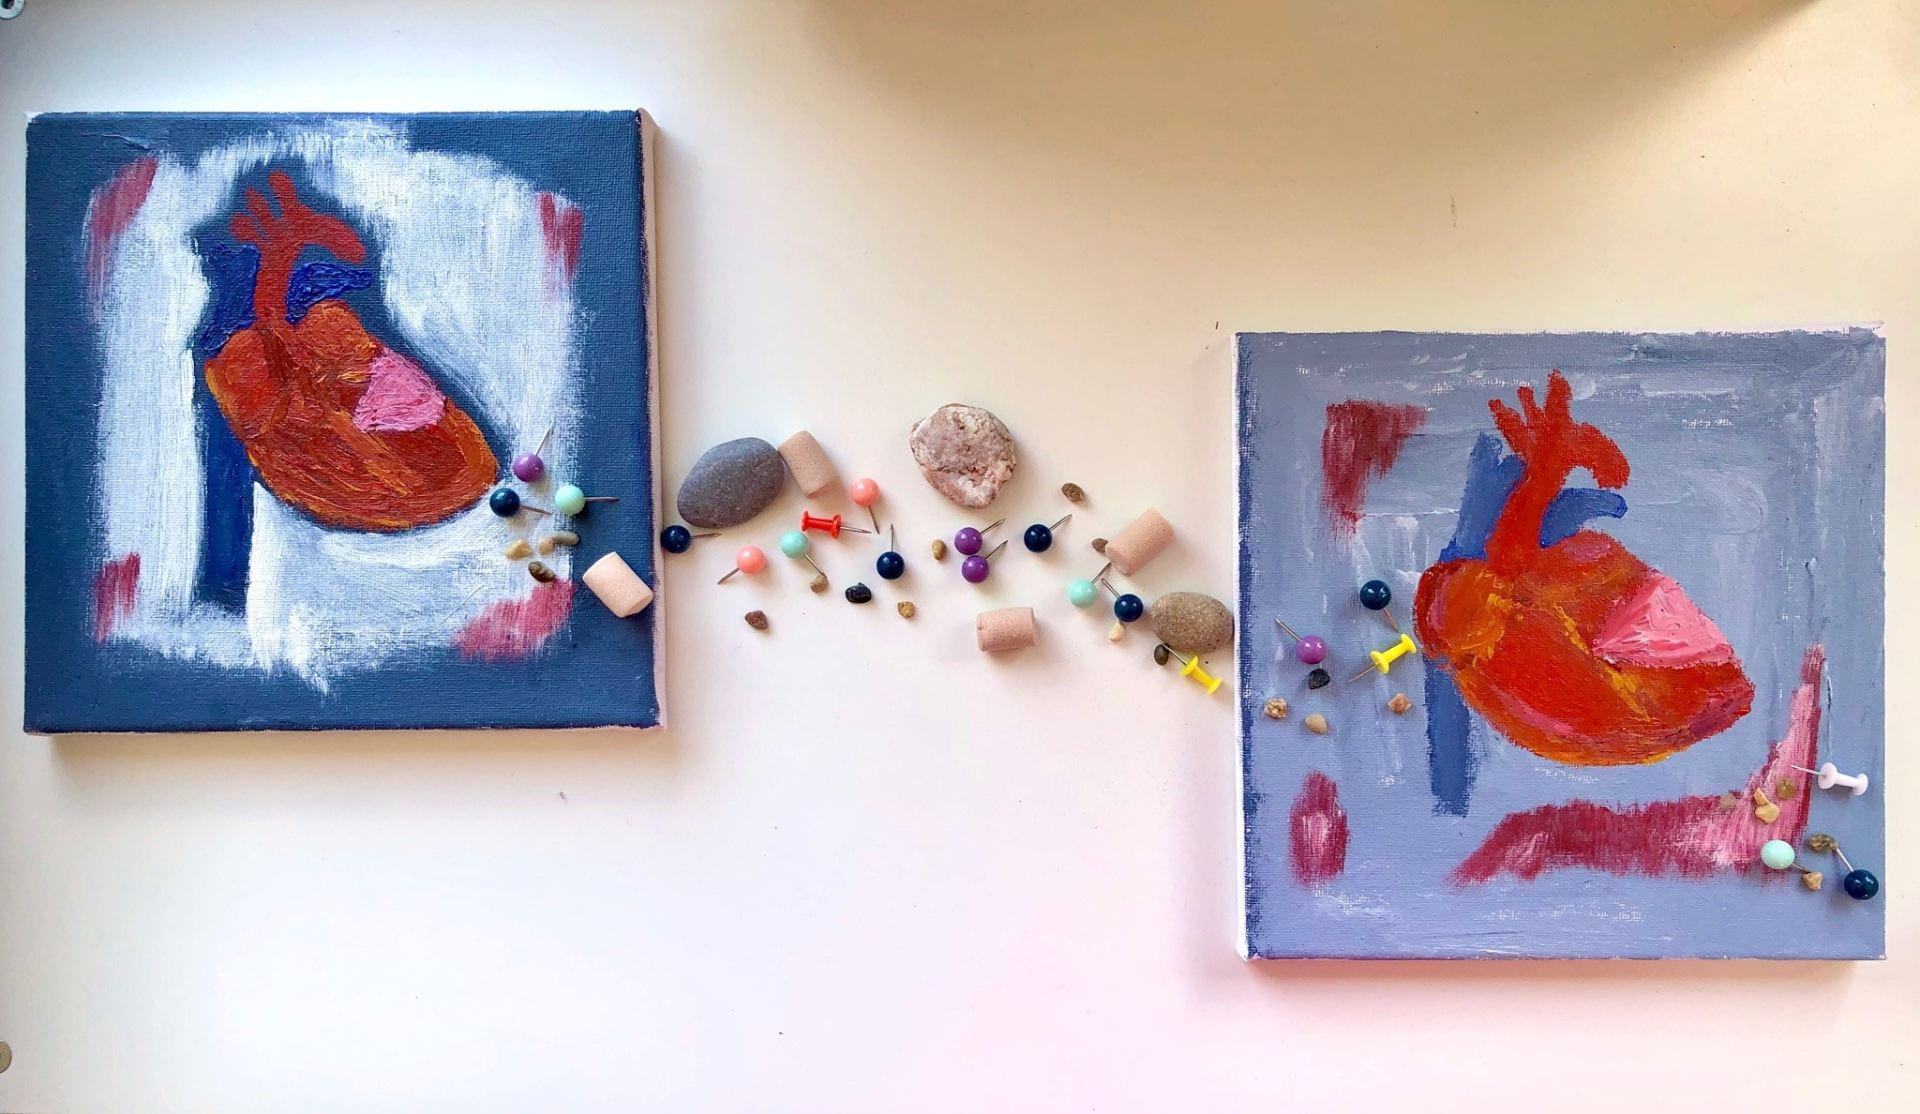 Two square paintings of hearts. Between them is an assortment of stones, earplugs and drawing pins.